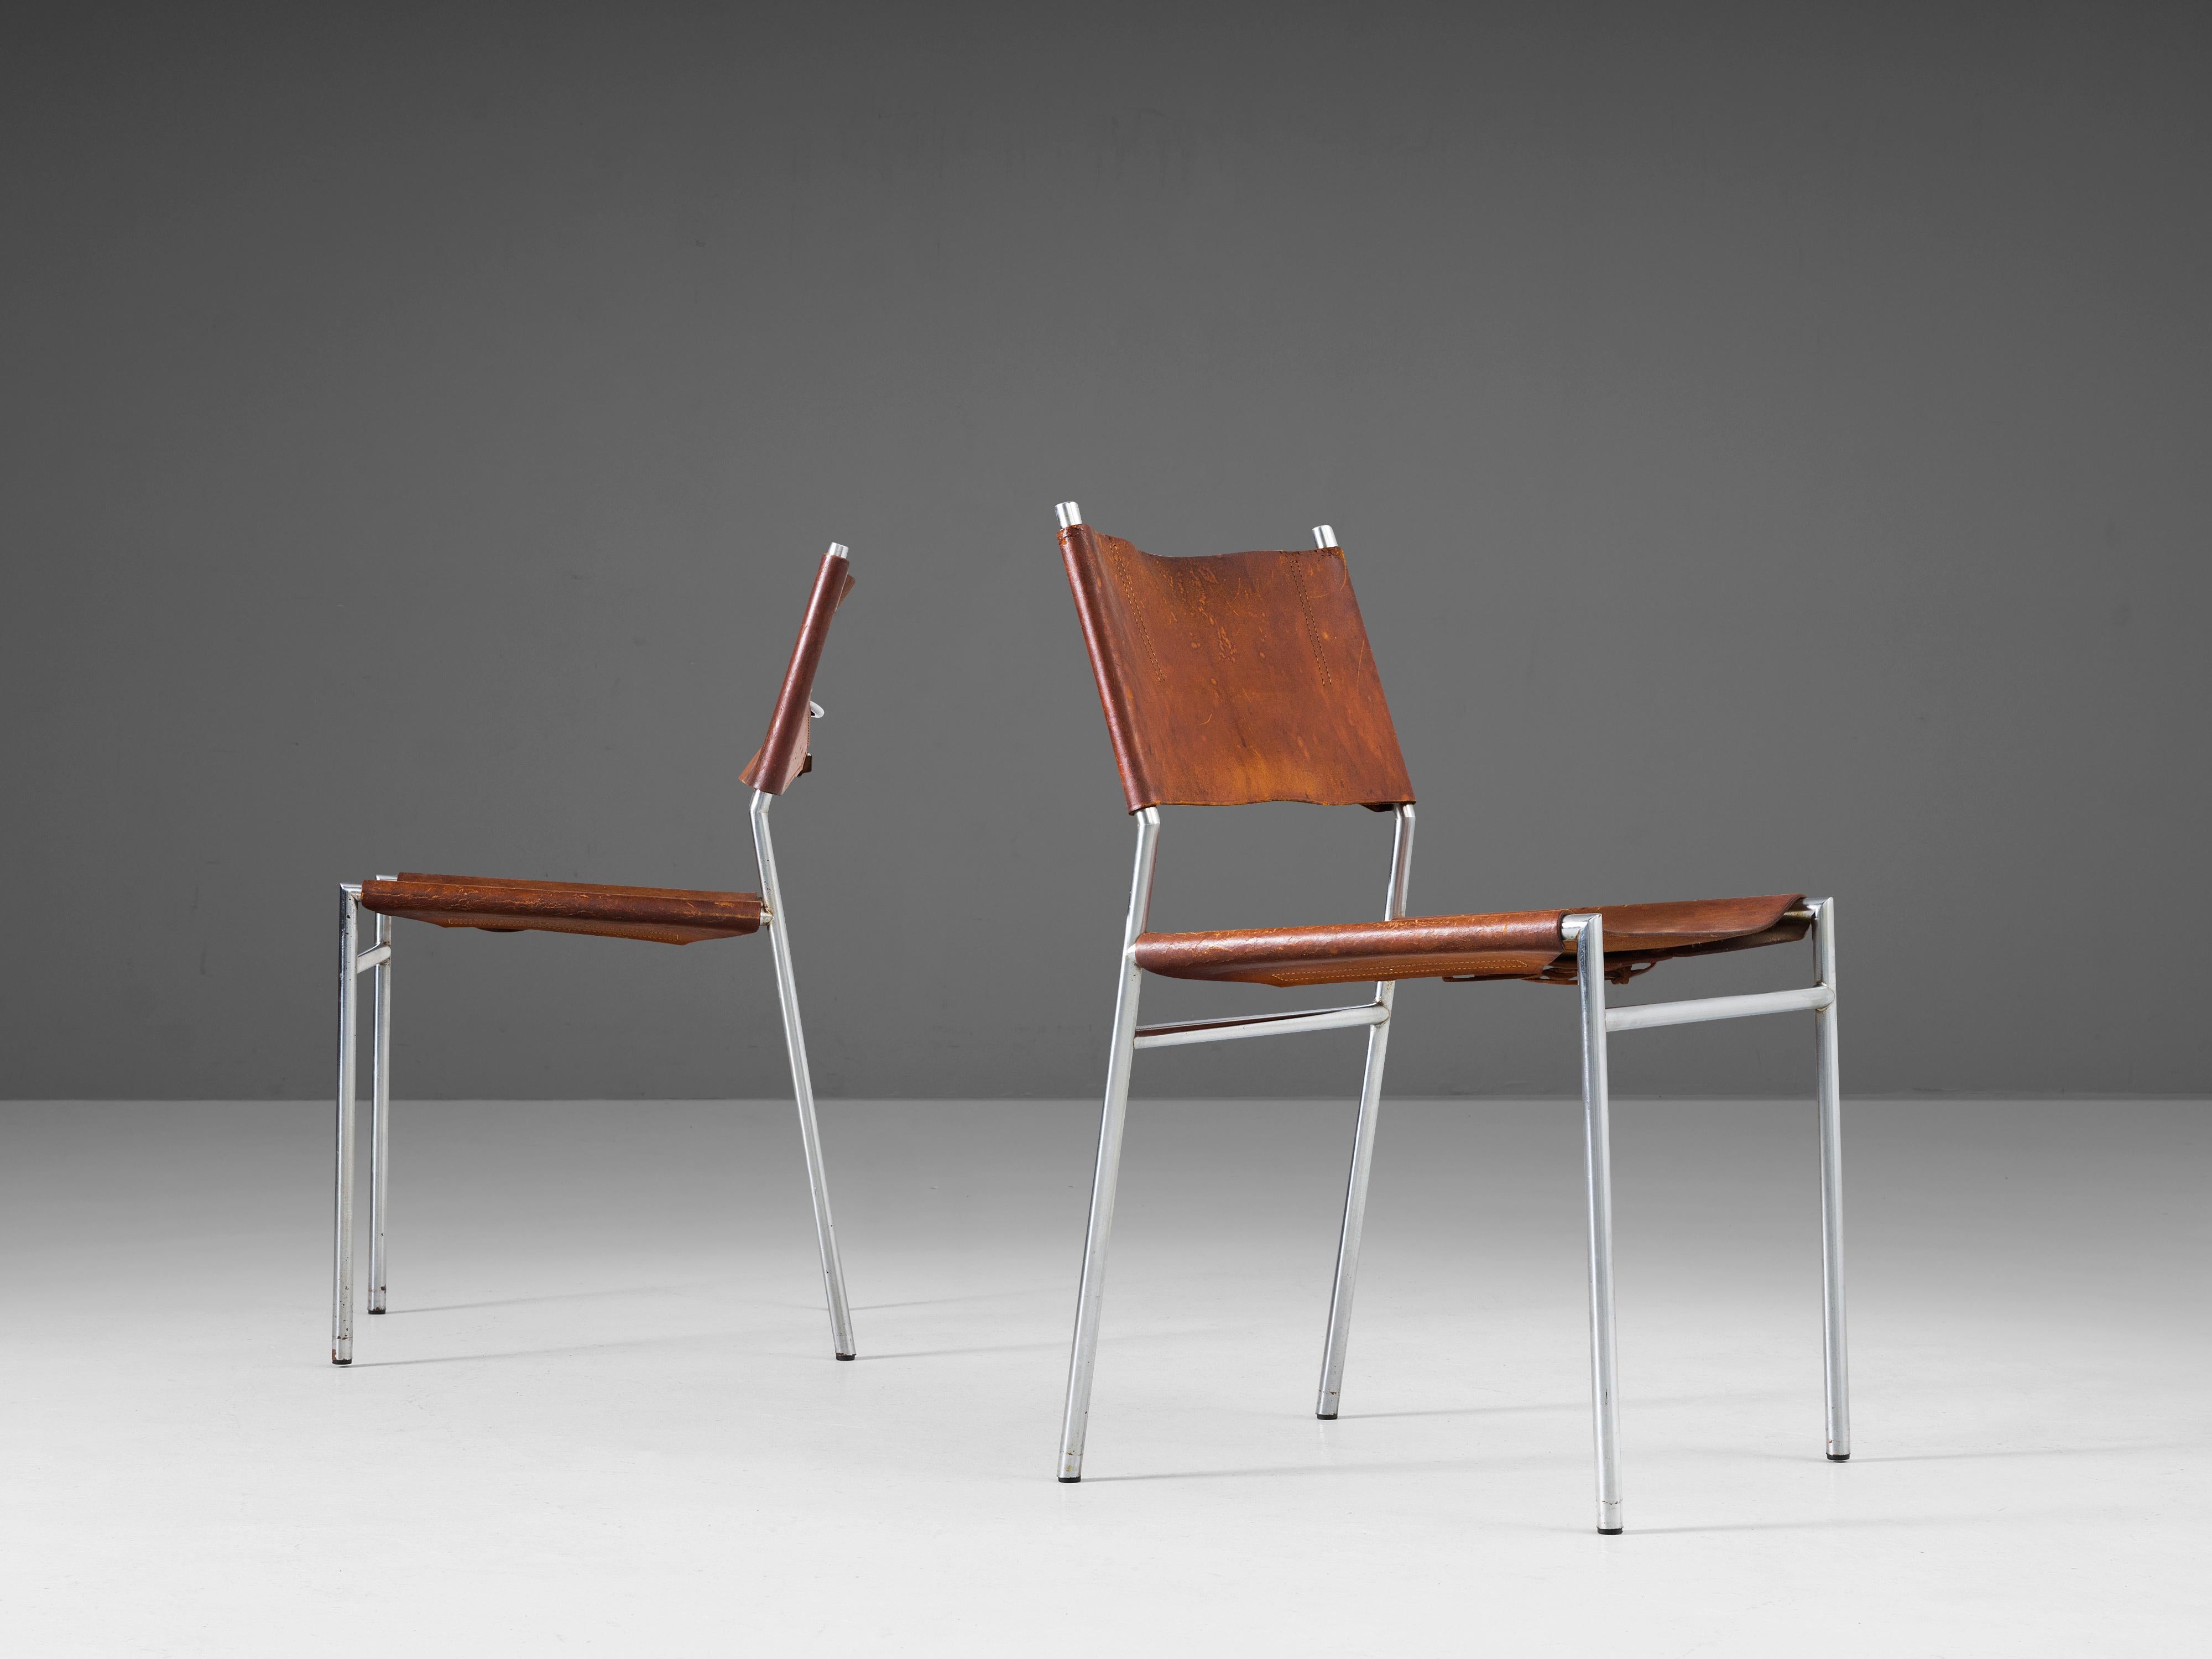 Martin Visser for 't Spectrum, pair of dining room chairs, steel and leather, the Netherlands, 1960s.

Pair of cognac leather dining chairs. The designs of Martin Visser characterize by clear lines and the use of metal in combination with natural